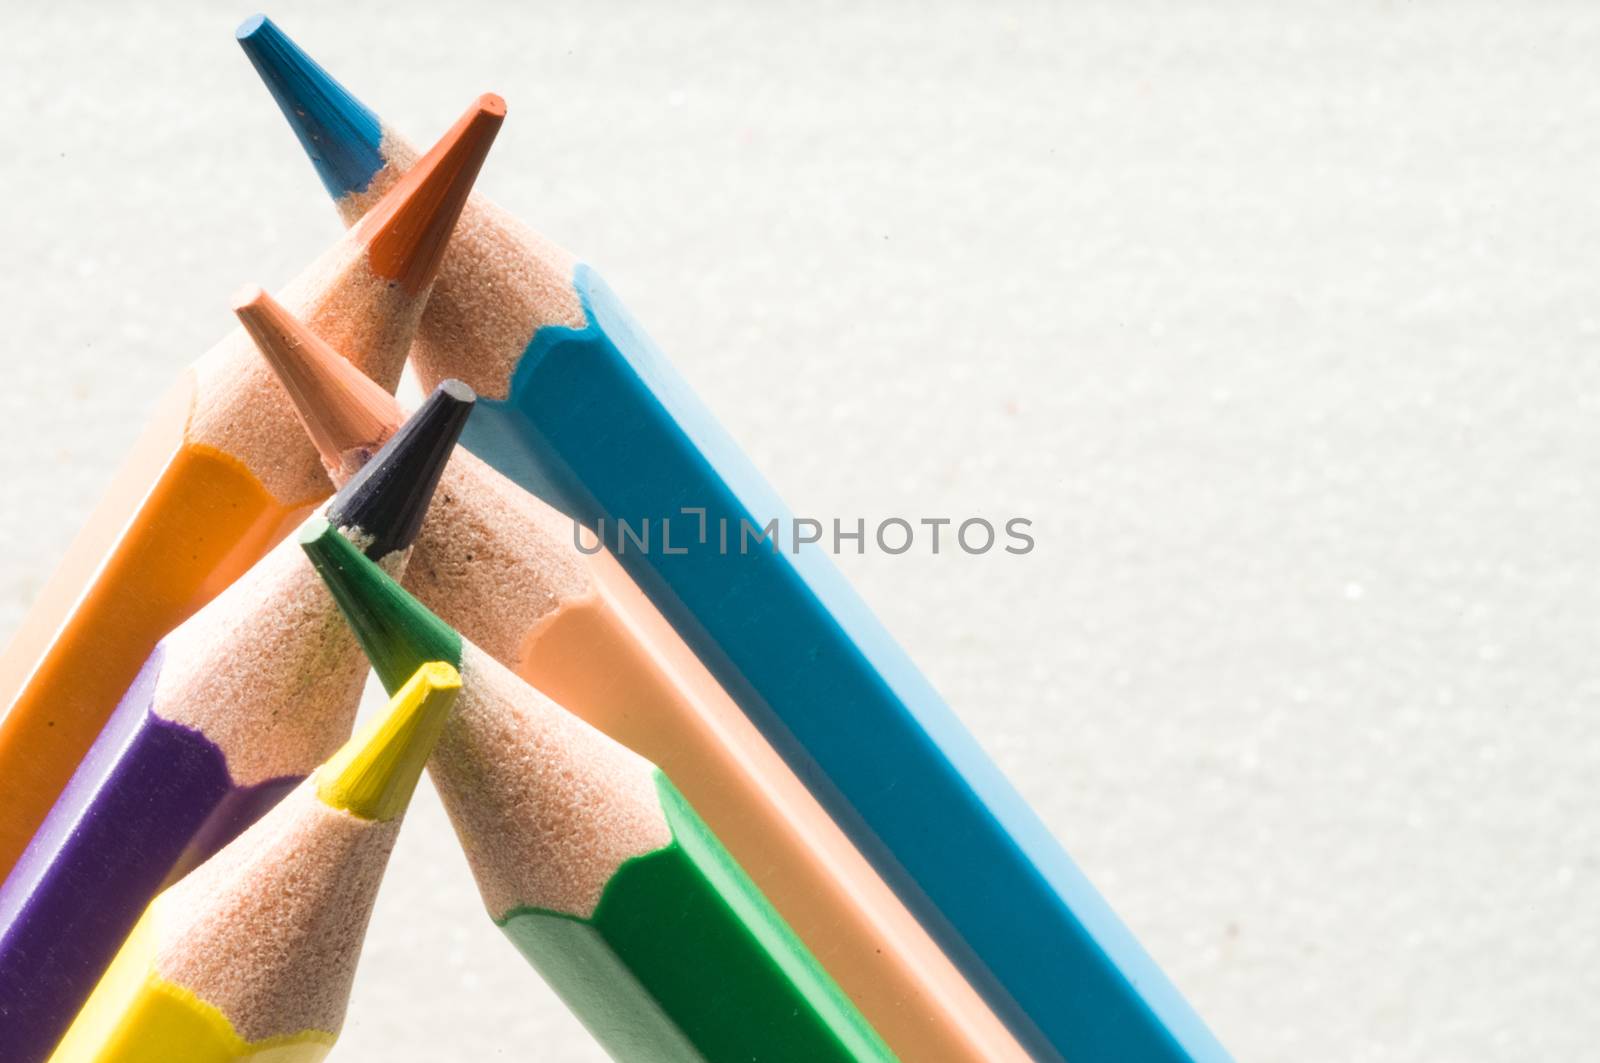 Crossing pencils with copy space by Haspion